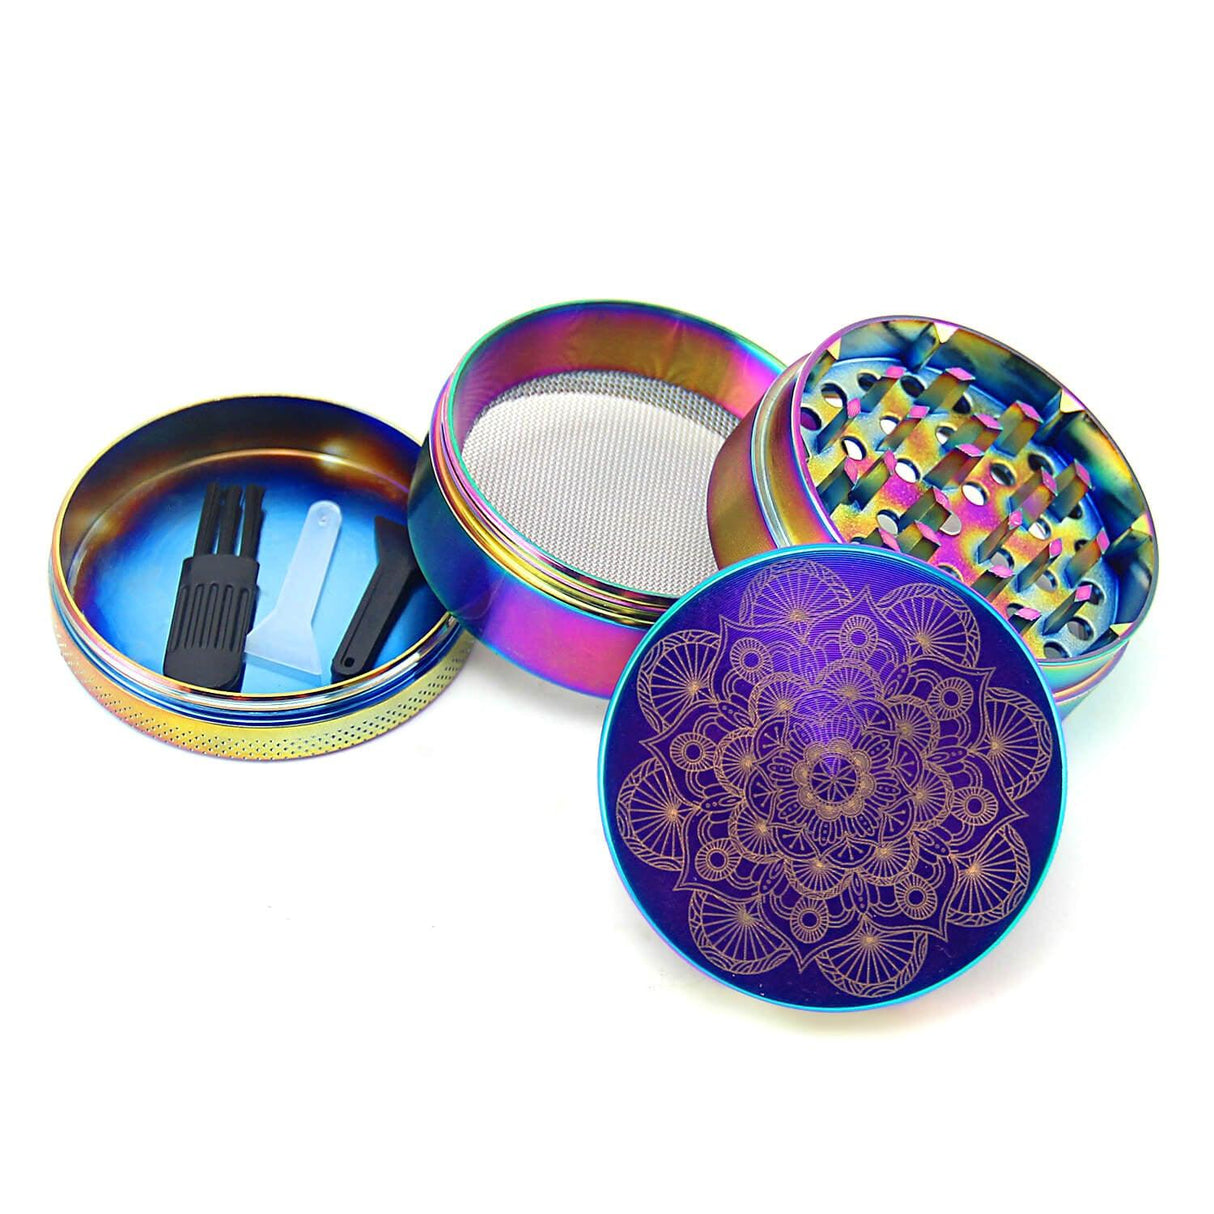 PILOT DIARY Mandala Herb Grinder open view showing all compartments and scraper tool